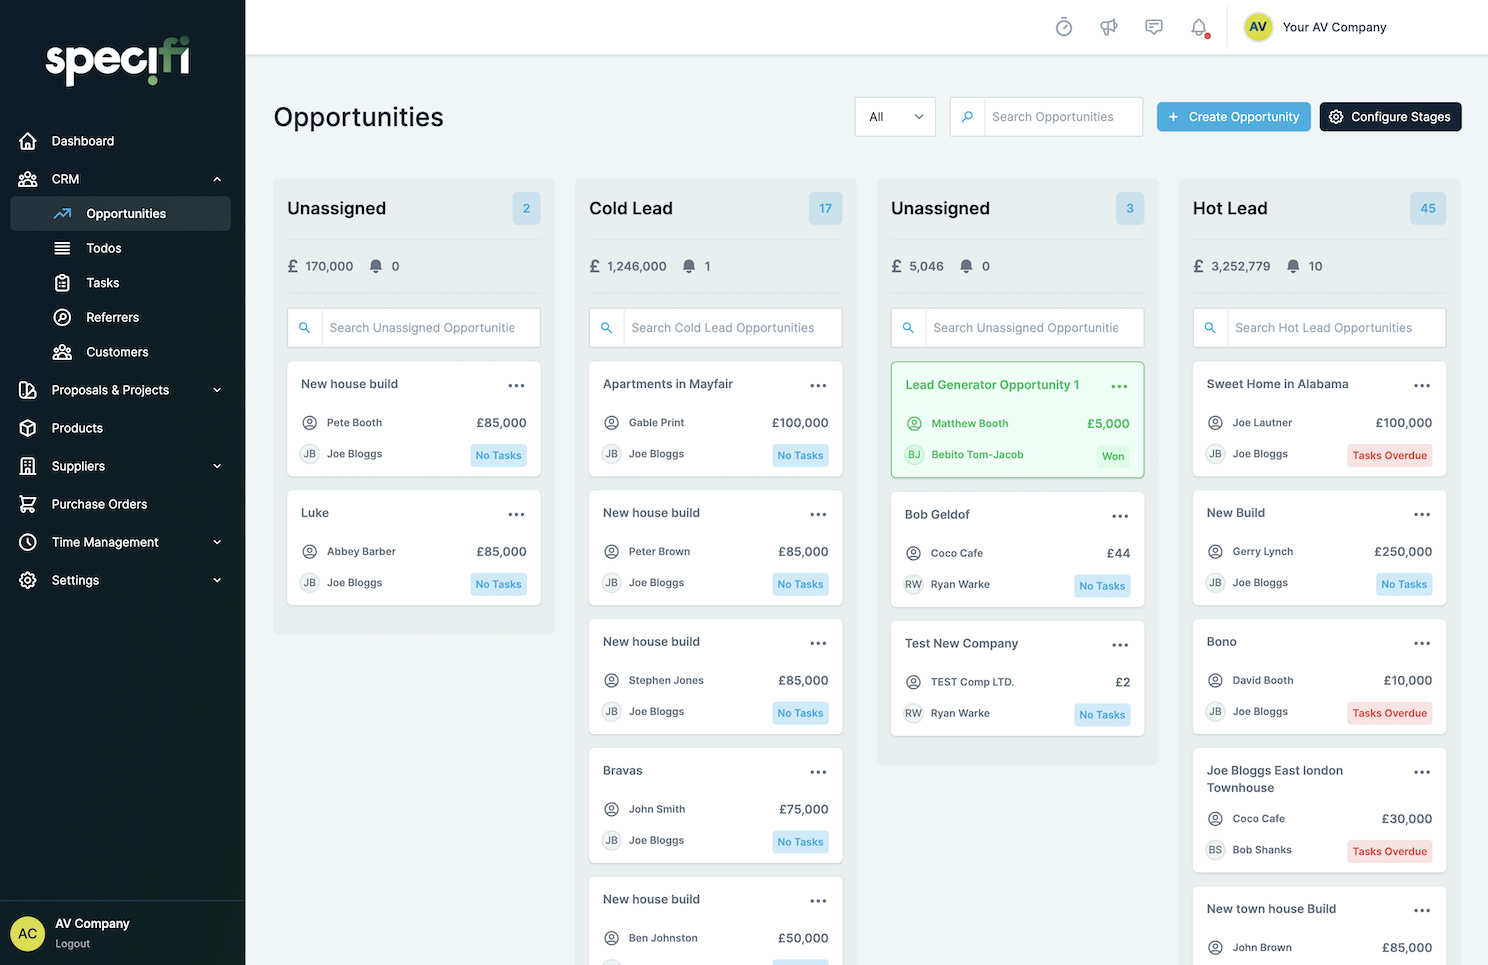 Screenshot of Opportunities page